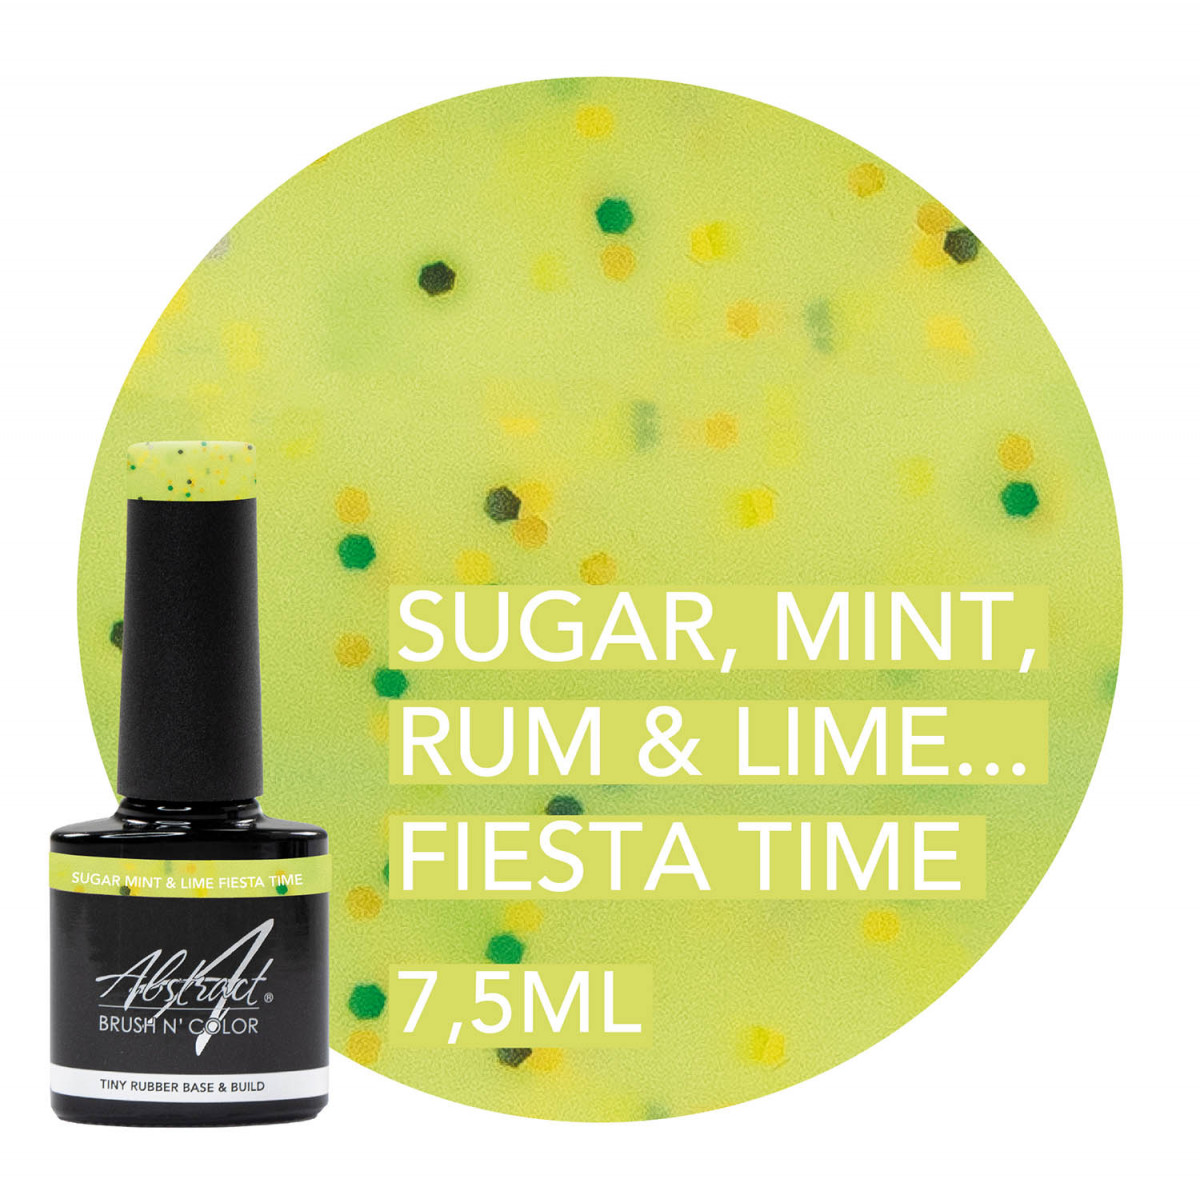 PRE-COMMANDE Sugar Mint Rum and Lime Fiesta Time - TINY Rubber Base & Build Gel Abstract